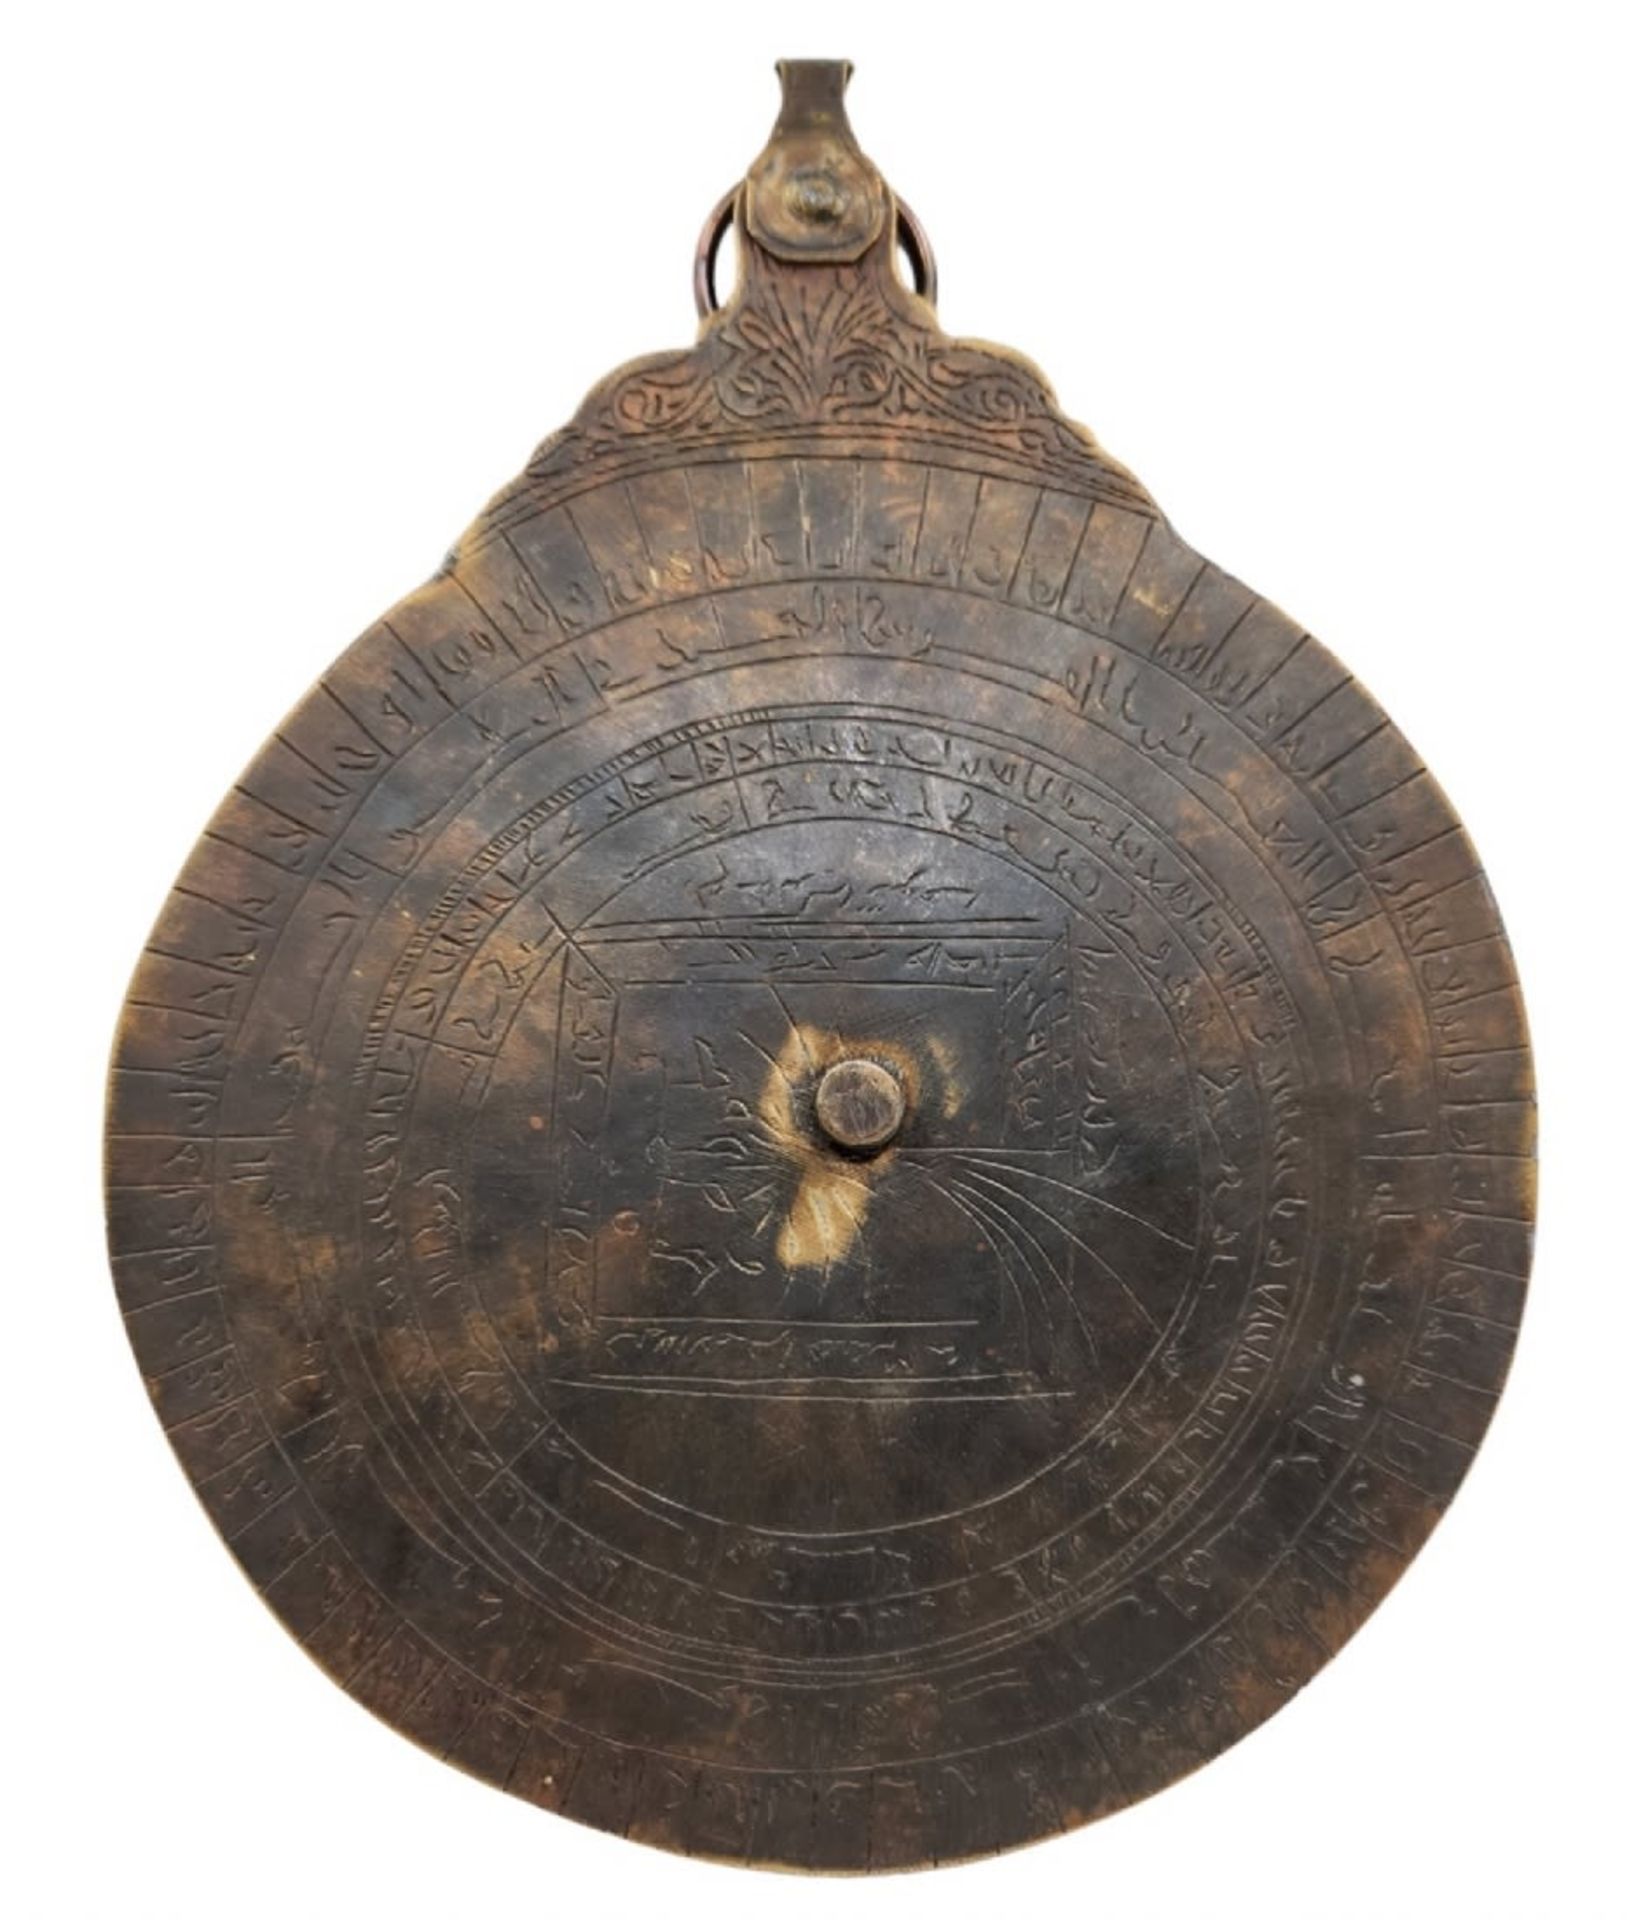 Astrolabe - Islamic Persian, made of brass, decorated with calligraphic engravings, end of the - Image 2 of 6